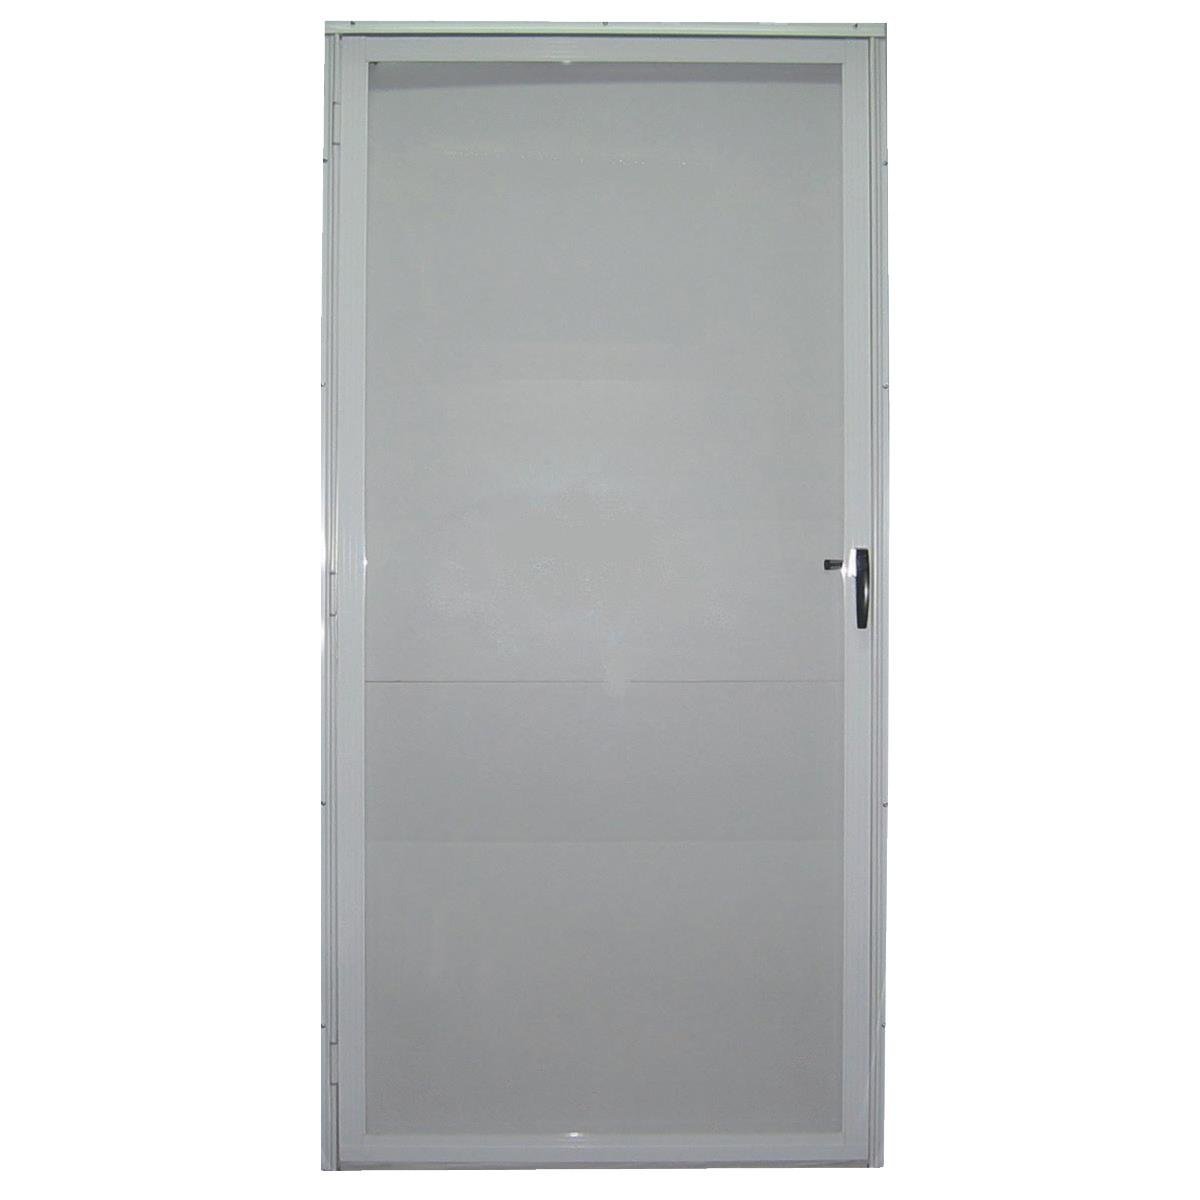 Croft Imperial Style 265 Full View Aluminum Storm Door - Right Hand